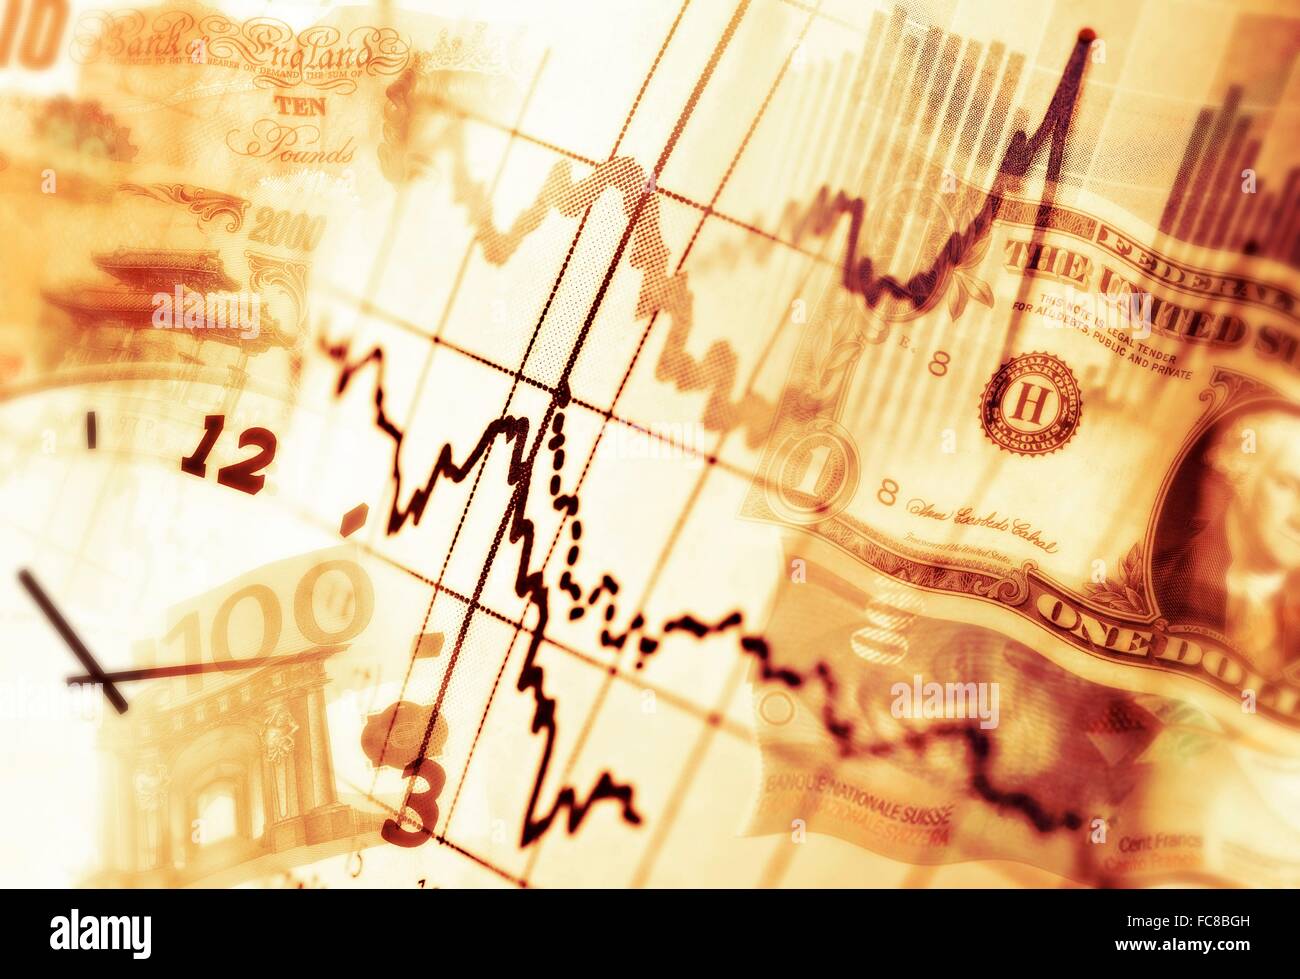 Diagrams, notes in various currencies and a clock as a symbol of the changes on the markets. Stock Photo